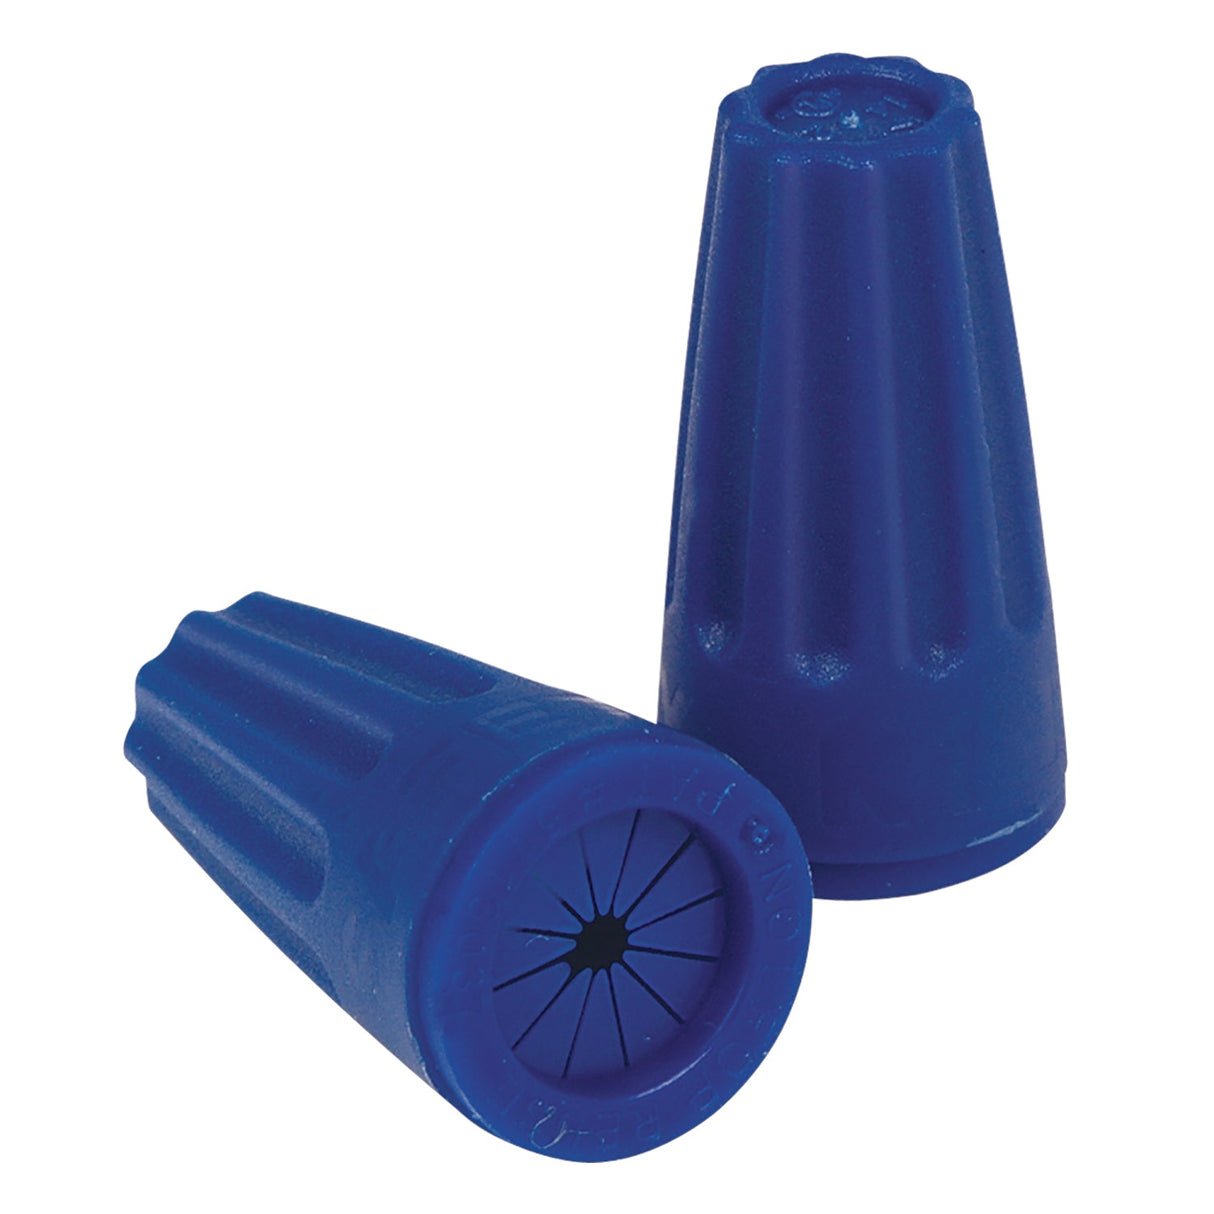 Dryconn - Blue/Blue Waterproof Wire Connectors (100 ct.) - 10241